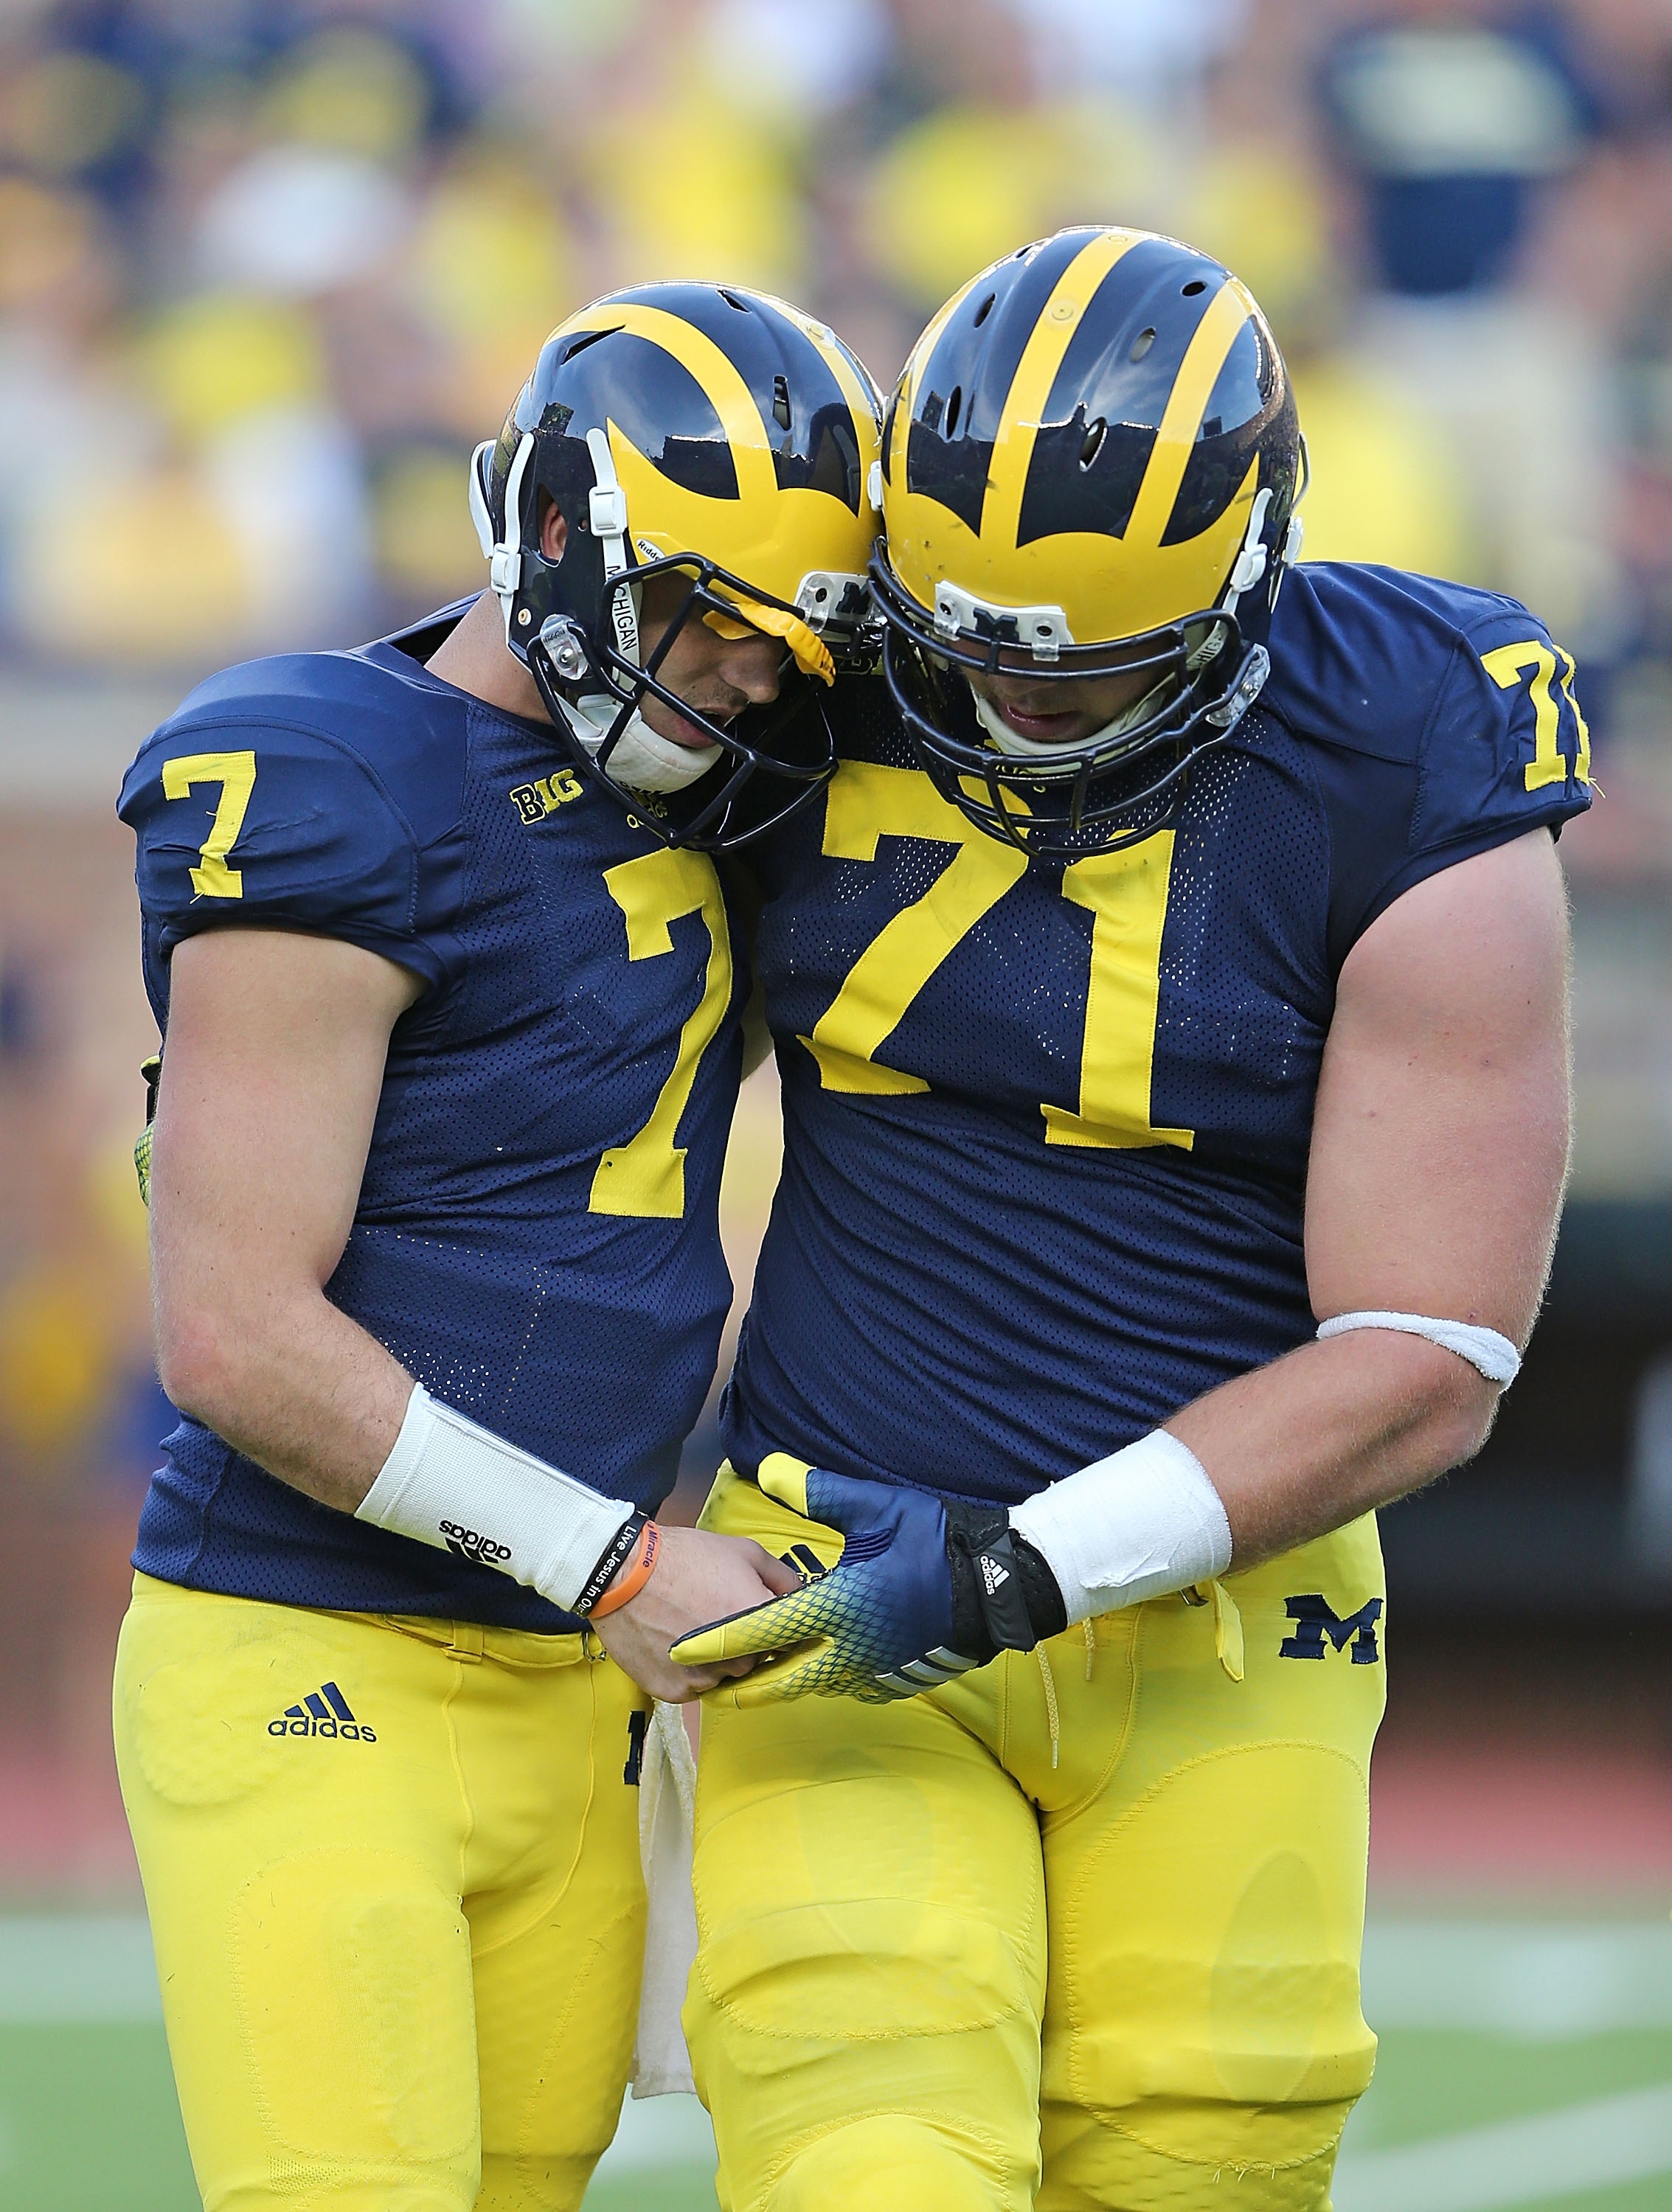 ANN ARBOR, MI - SEPTEMBER 27: Quarterback Shane Morris #7 of the Michigan Wolverines is helped off the field by Ben Braden #71 during the fourth quarter of the game against the Minnesota Golden Gophers at Michigan Stadium on September 27, 2014 in Ann Arbor, Michigan. The Golden Gophers defeated the Wolverines 30-14. (Photo by Leon Halip/Getty Images)